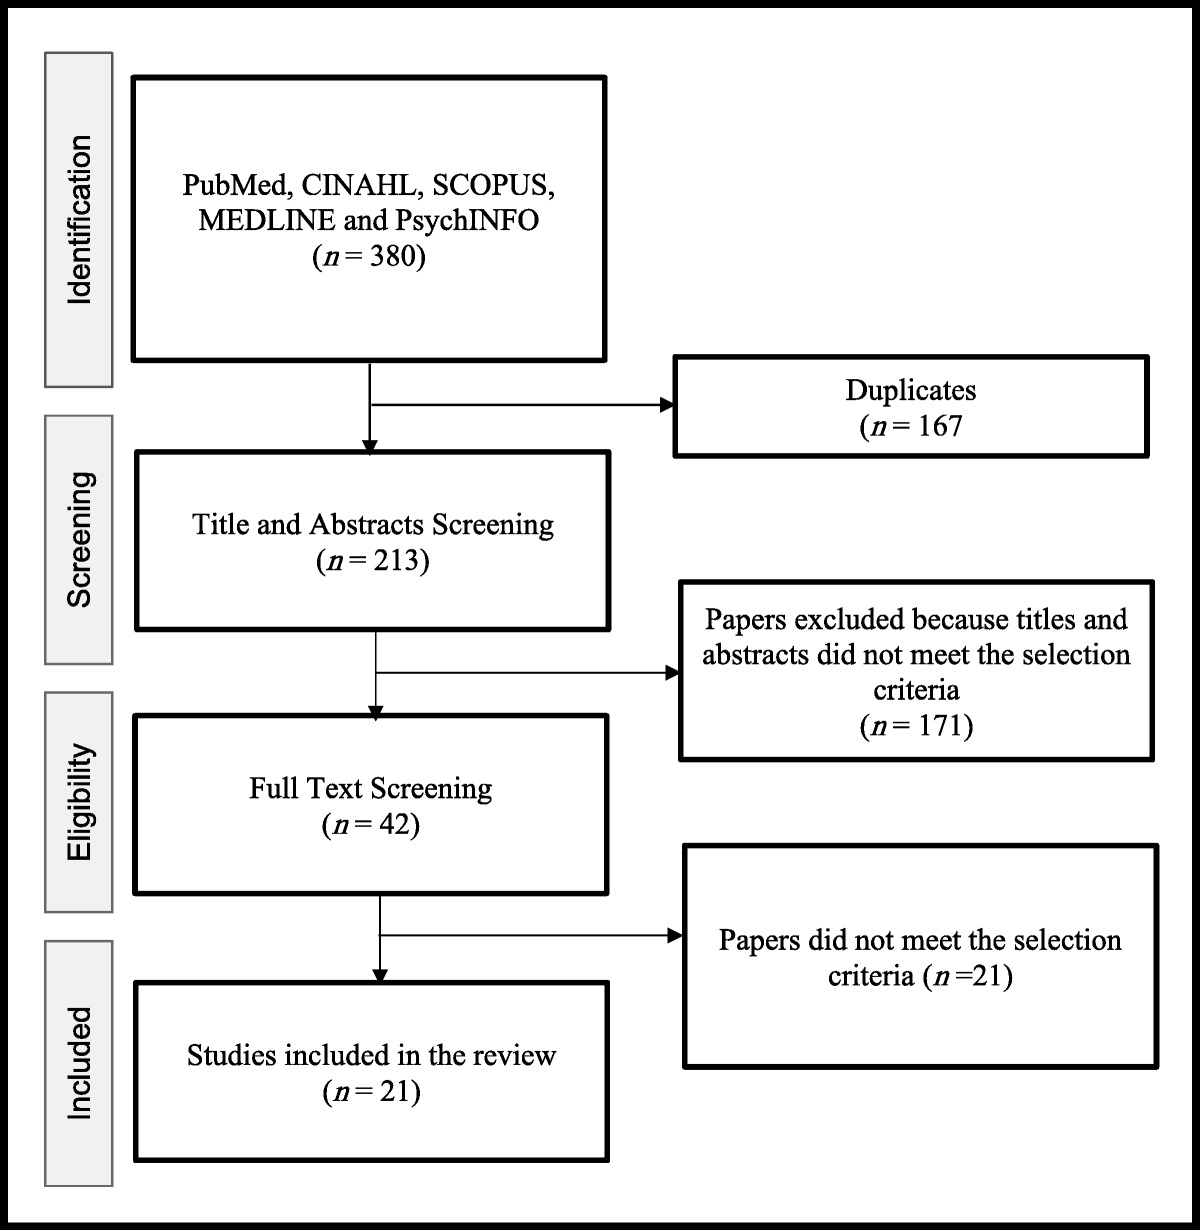 Leadership Styles and Nurses' Innovative Behaviors: A Systematic Review